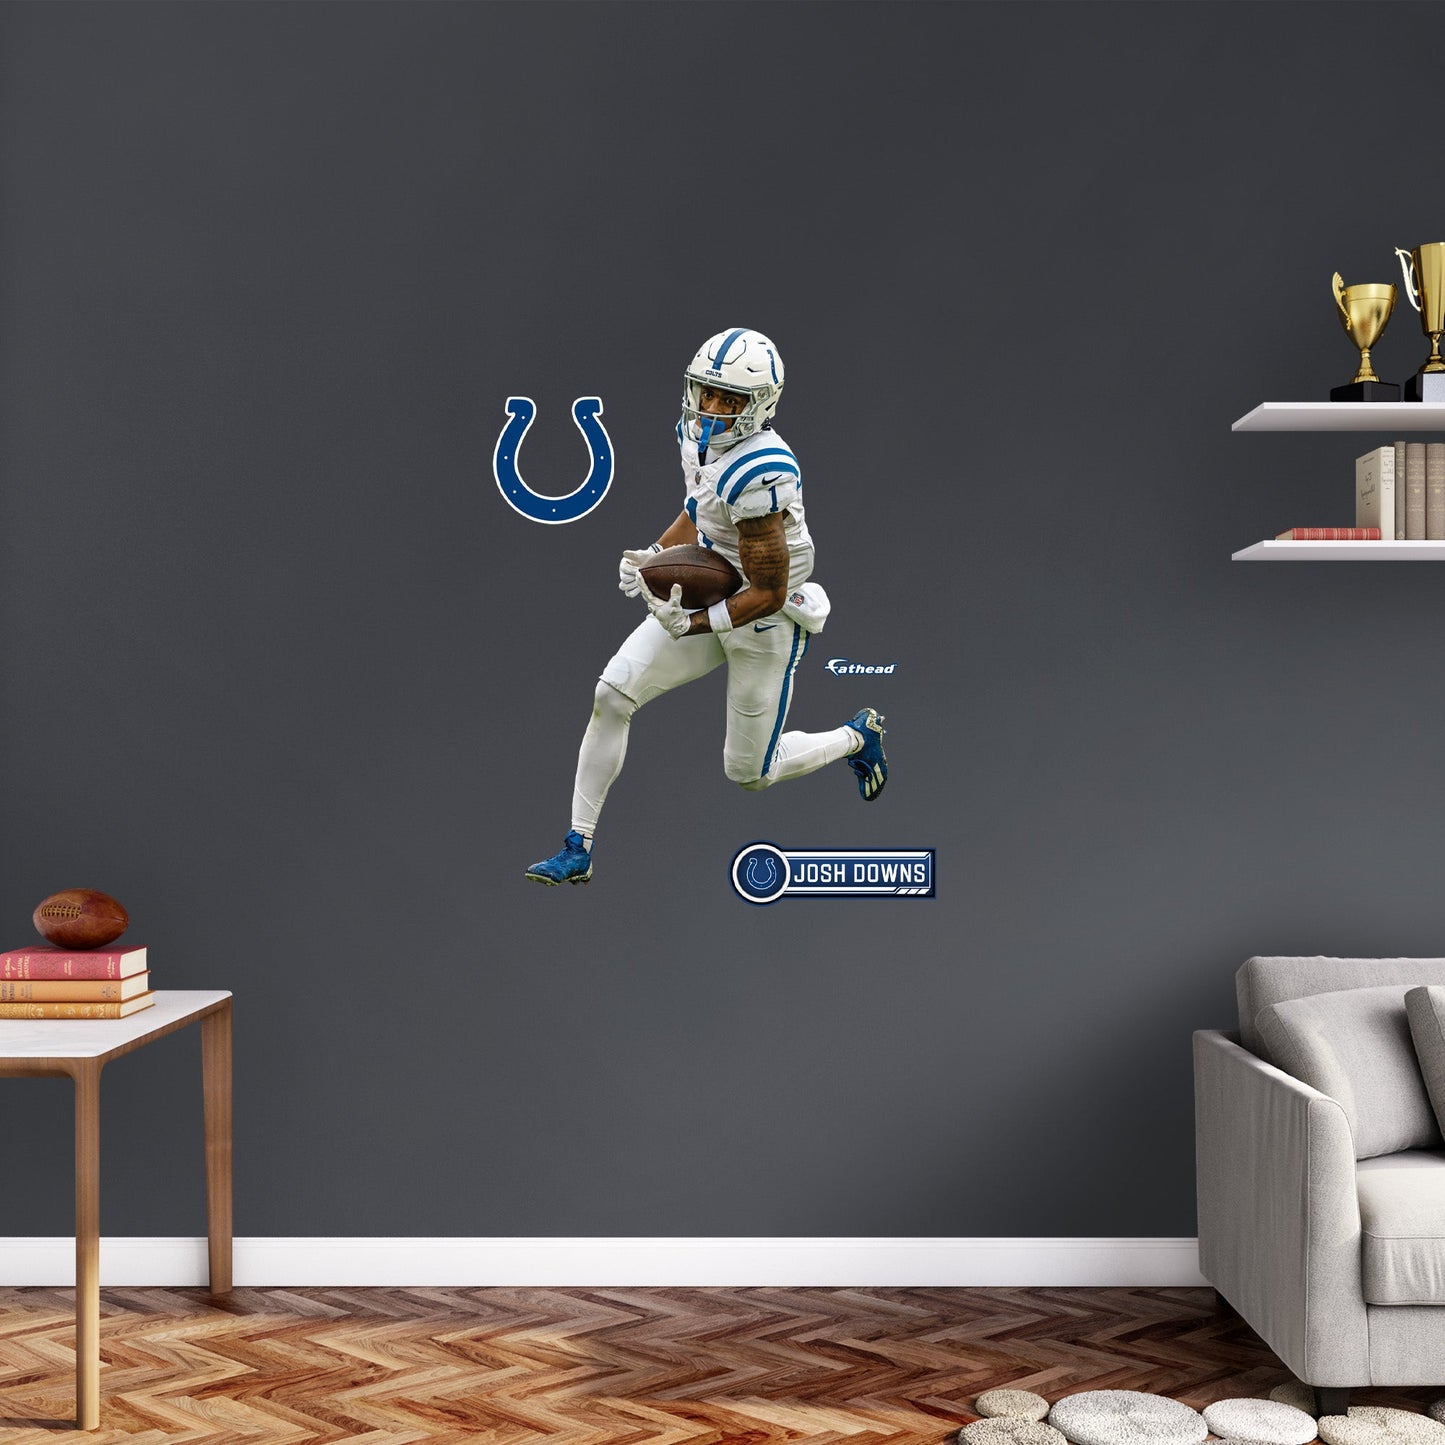 Indianapolis Colts: Josh Downs         - Officially Licensed NFL Removable     Adhesive Decal